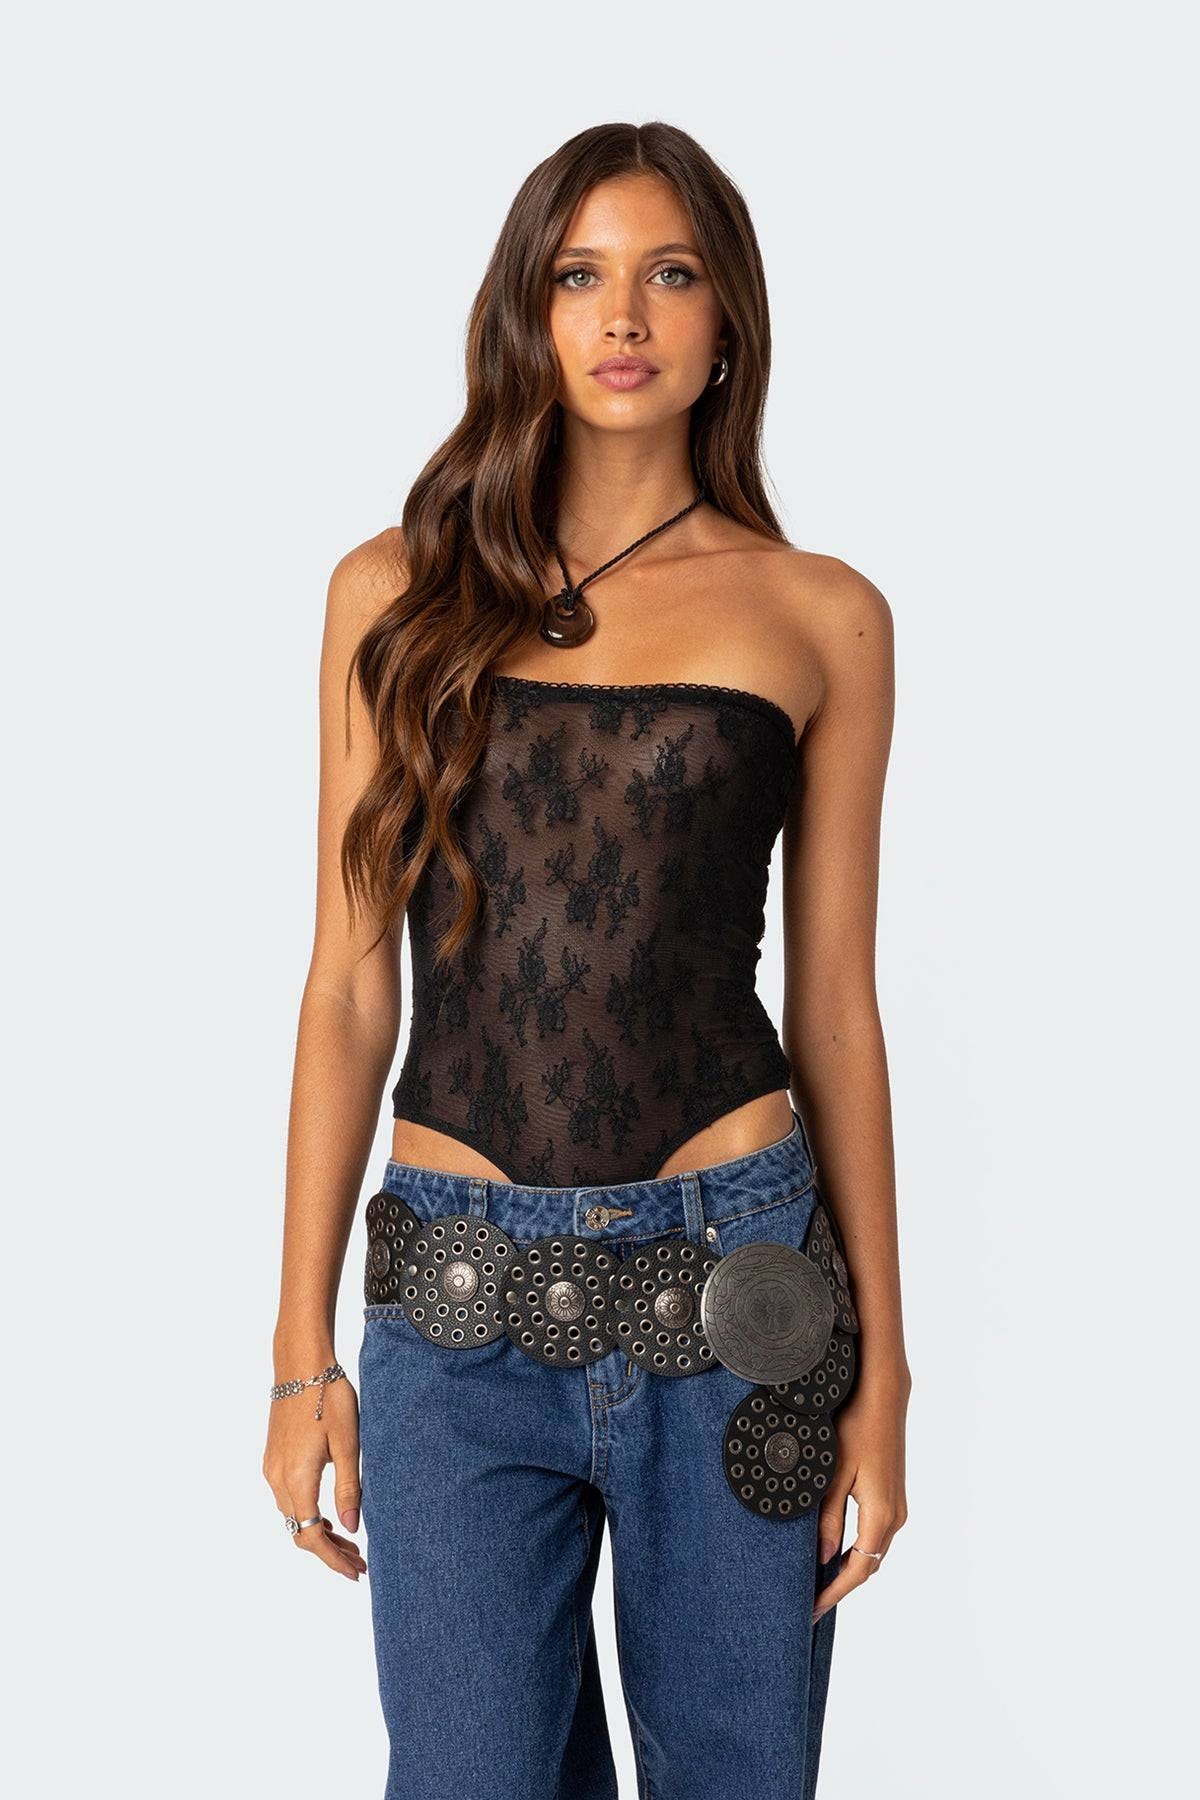 Strapless Sheer Lace Bodysuit for Date Night | Image